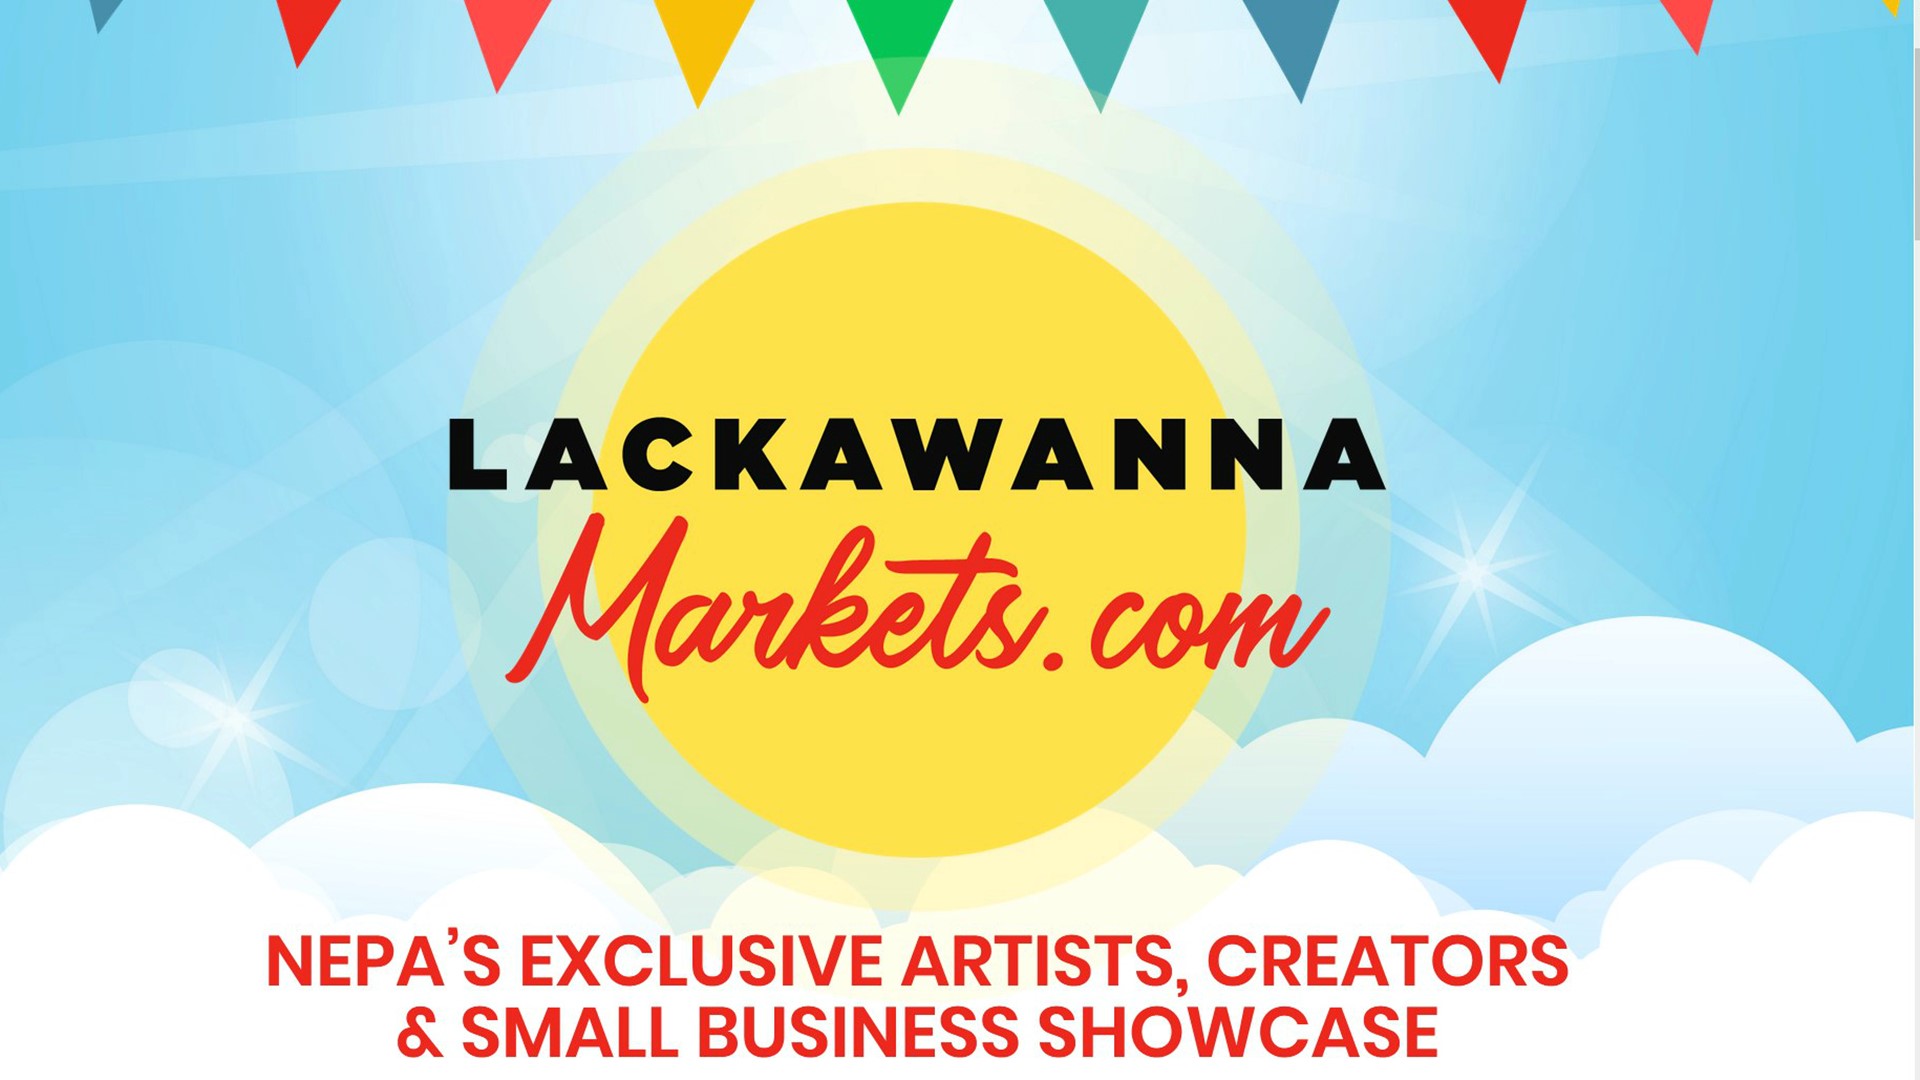 The new website is a directory to help artists, creators, and small businesses connect with their market.